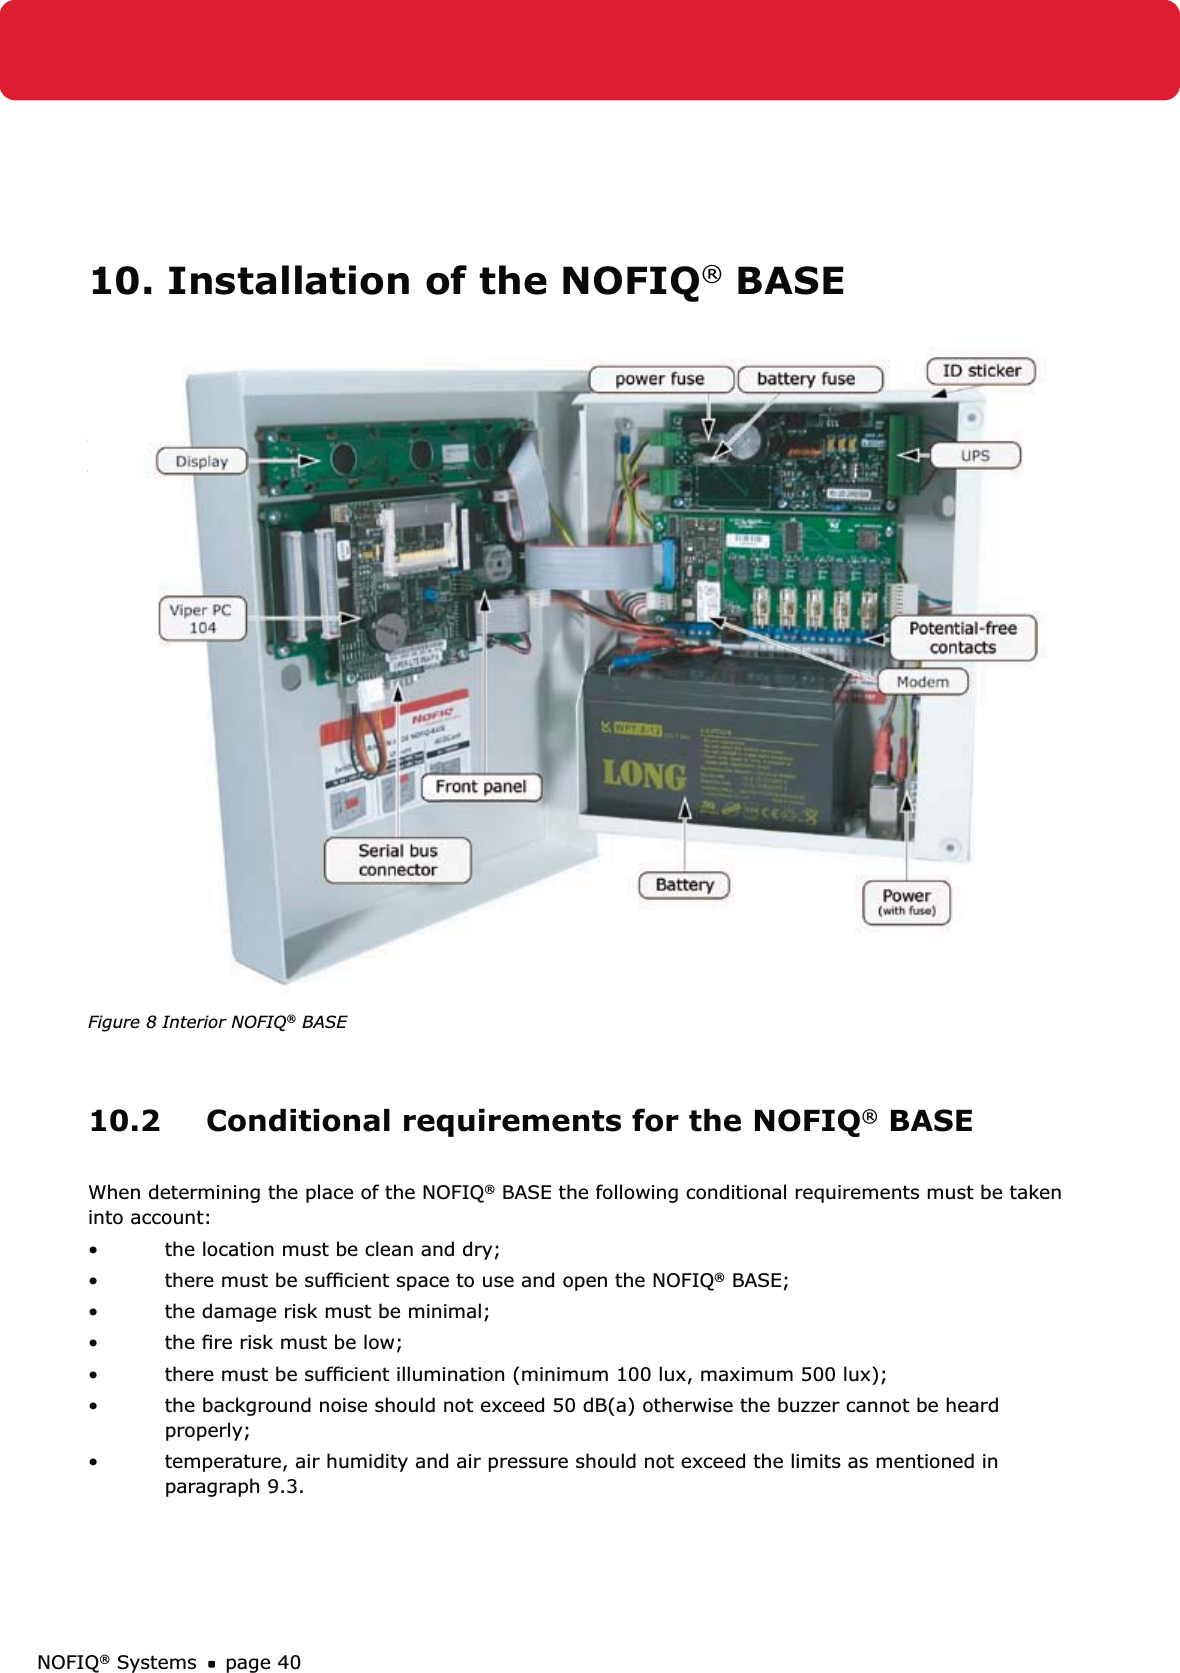 NOFIQ® Systems page 4010. Installation of the NOFIQ® BASE 10.1 GeneralThis chapter explains the installation of the NOFIQ® BASE.The ﬁgure below shows the interior of the NOFIQ® BASE.Figure 8 Interior NOFIQ® BASE10.2  Conditional requirements for the NOFIQ® BASEWhen determining the place of the NOFIQ® BASE the following conditional requirements must be taken into account:the location must be clean and dry;• there must be sufﬁcient space to use and open the NOFIQ•  ® BASE;the damage risk must be minimal;• the ﬁre risk must be low;• there must be sufﬁcient illumination (minimum 100 lux, maximum 500 lux);• the background noise should not exceed 50 dB(a) otherwise the buzzer cannot be heard • properly;temperature, air humidity and air pressure should not exceed the limits as mentioned in • paragraph 9.3.